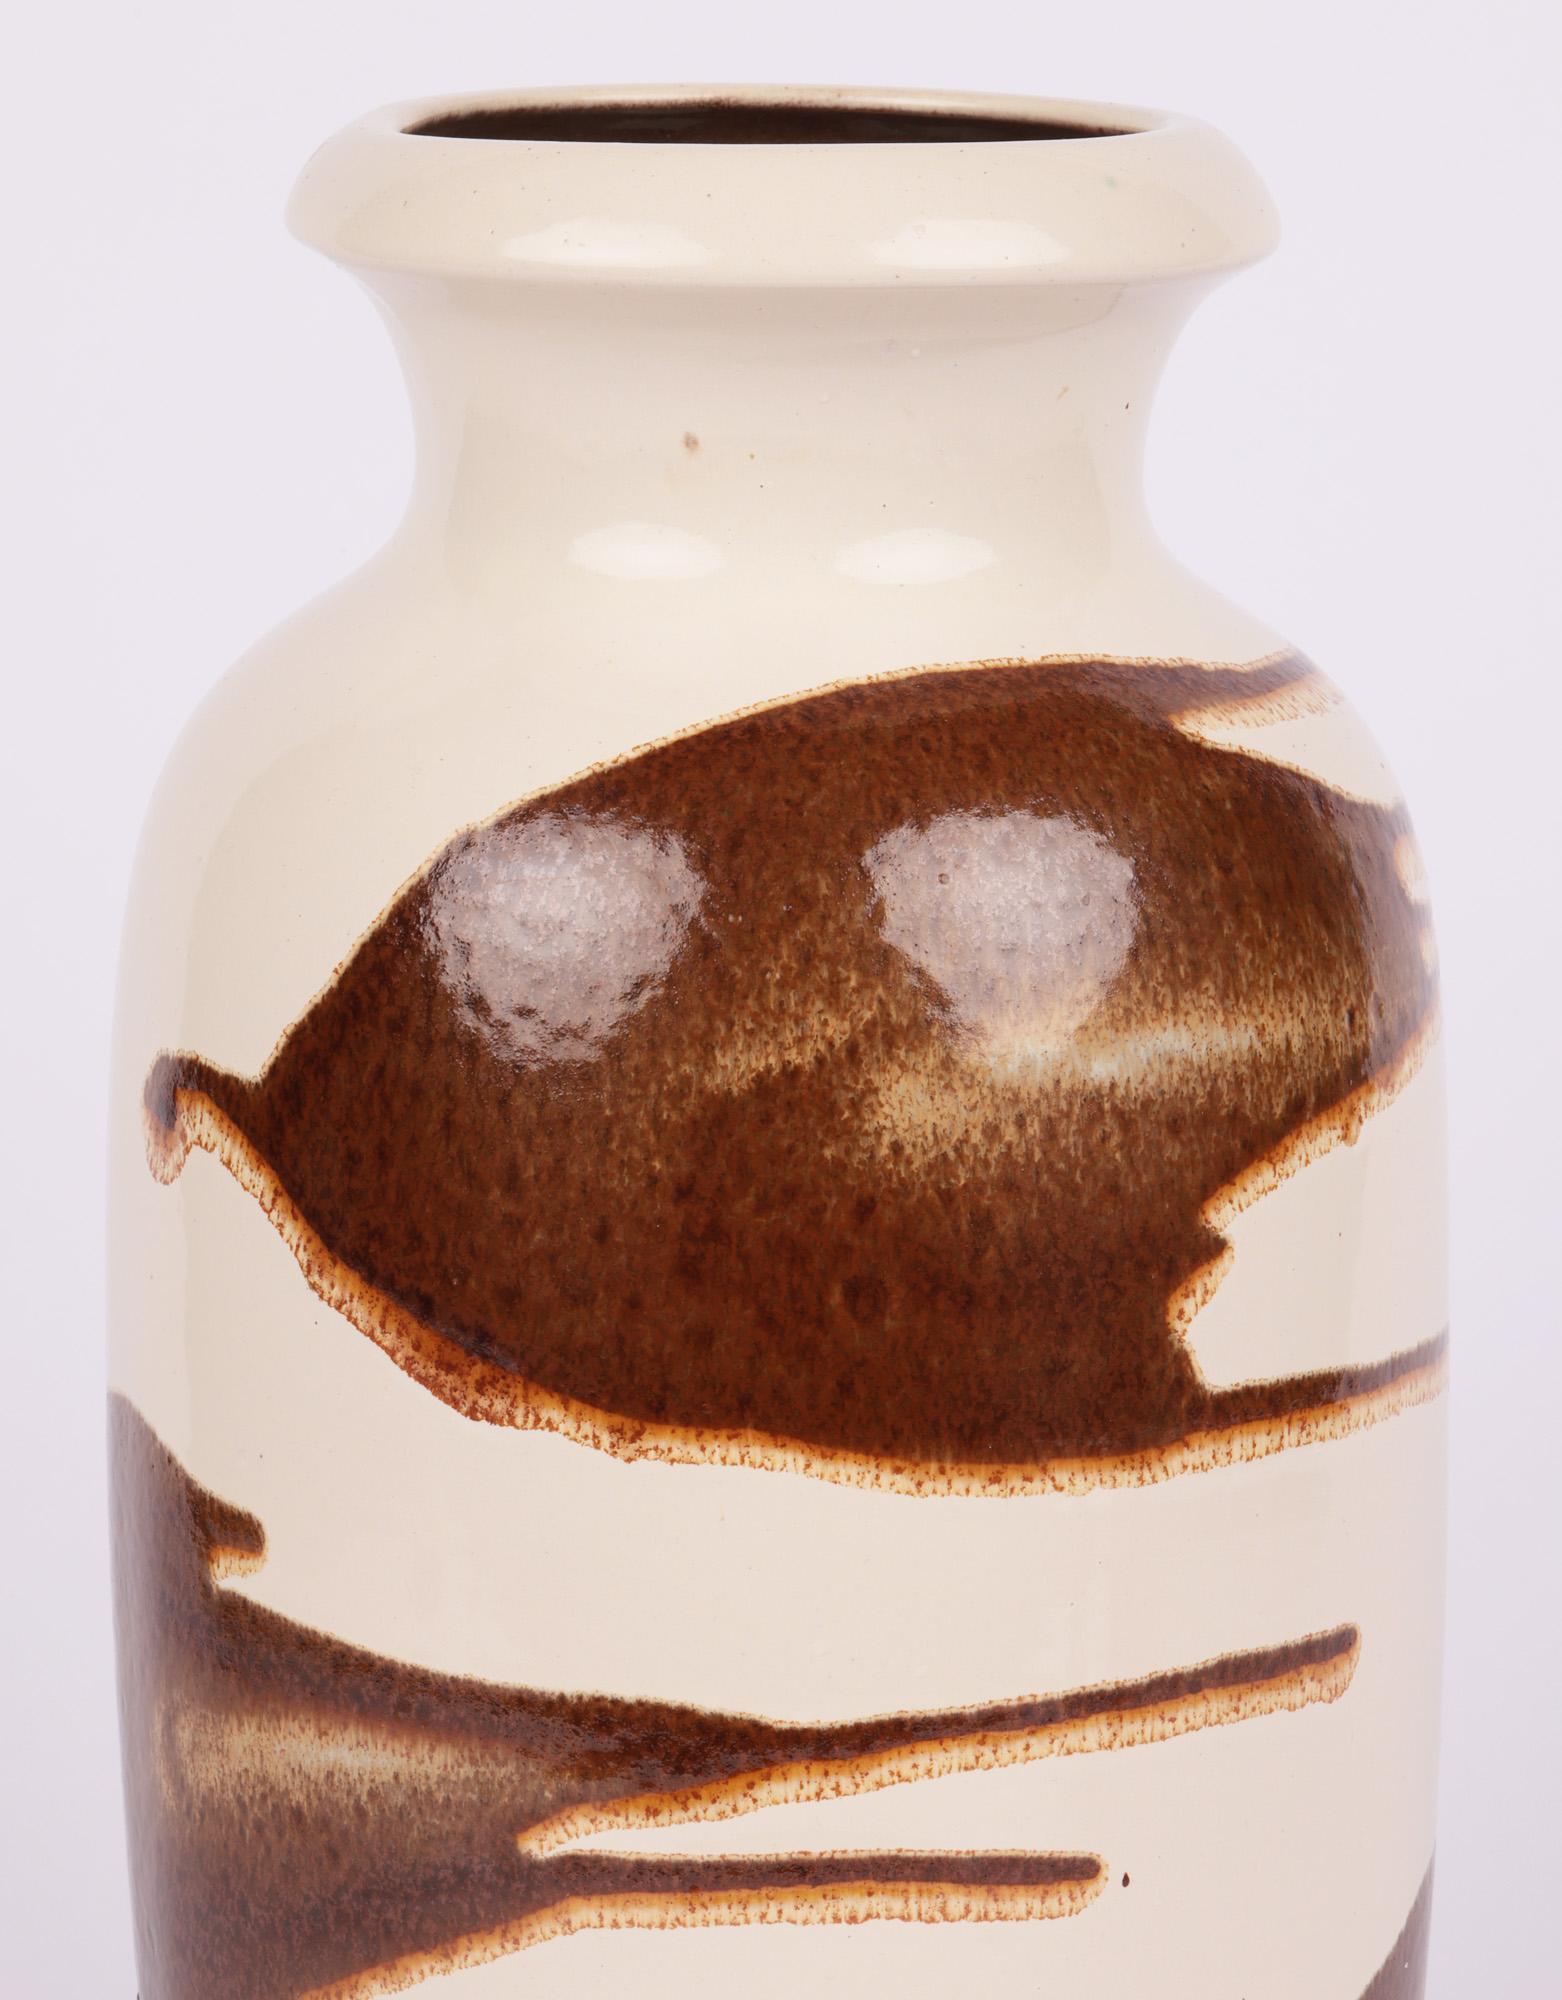 A large and impressive West-German mid-century art pottery vase with abstract designs by Scheurich Keramik dating from around 1960. The tall bulbous vase stands on an unglazed round foot with recessed base and has a pinched neck and shaped top with